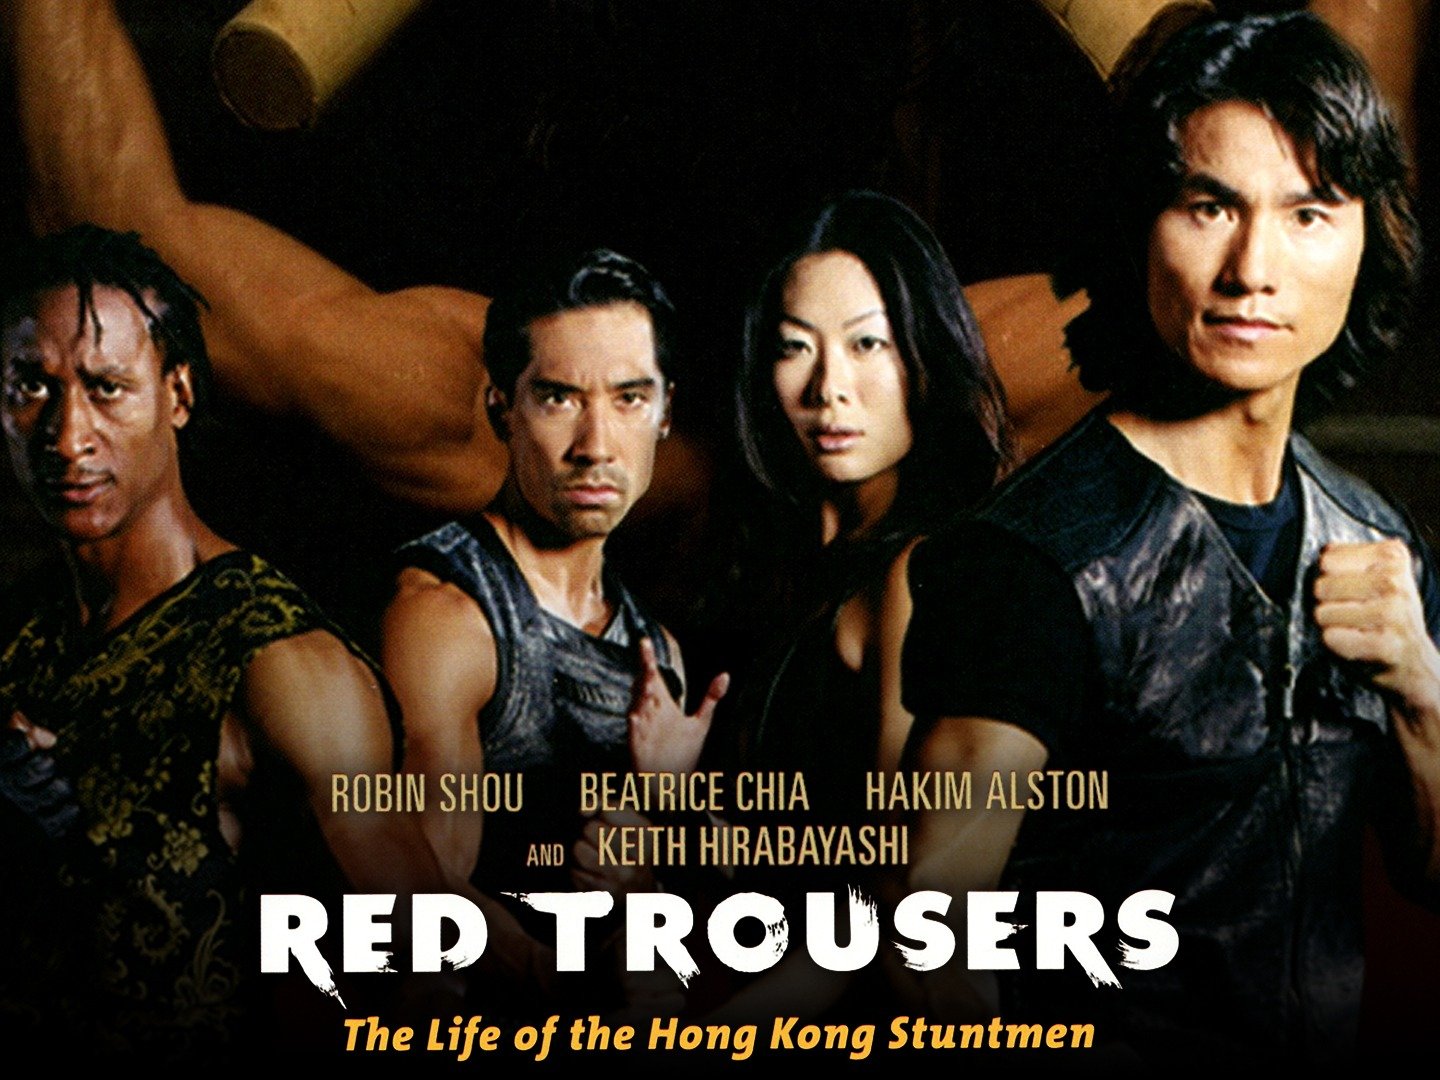 YESASIA Red Trousers US Version VCD  Robin Shou Tai Seng Video US   Hong Kong Movies  Videos  Free Shipping  North America Site